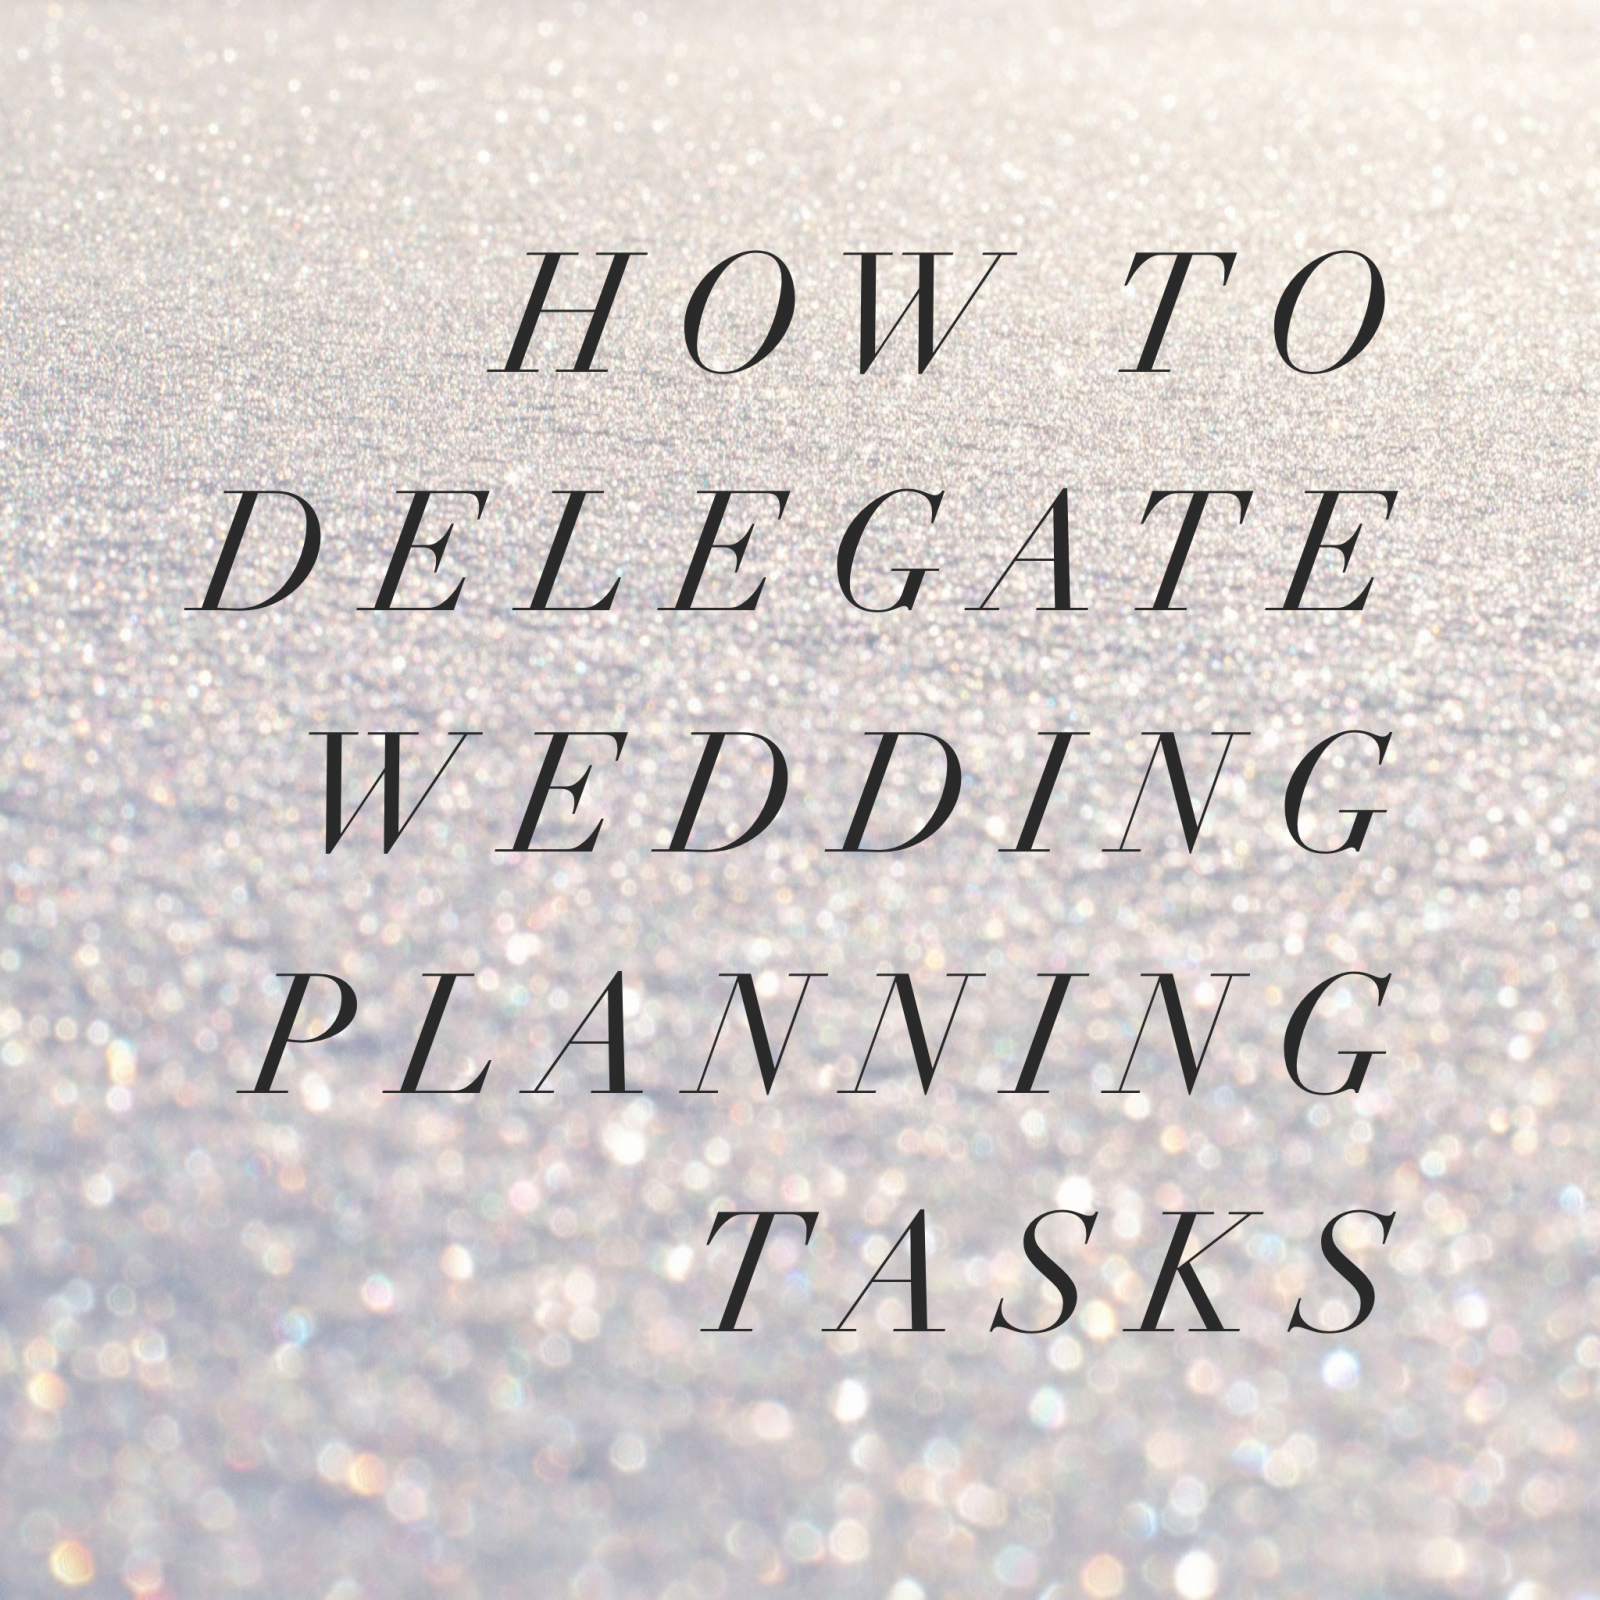 How To Delegate Wedding Planning Tasks by Heather of Music City Events